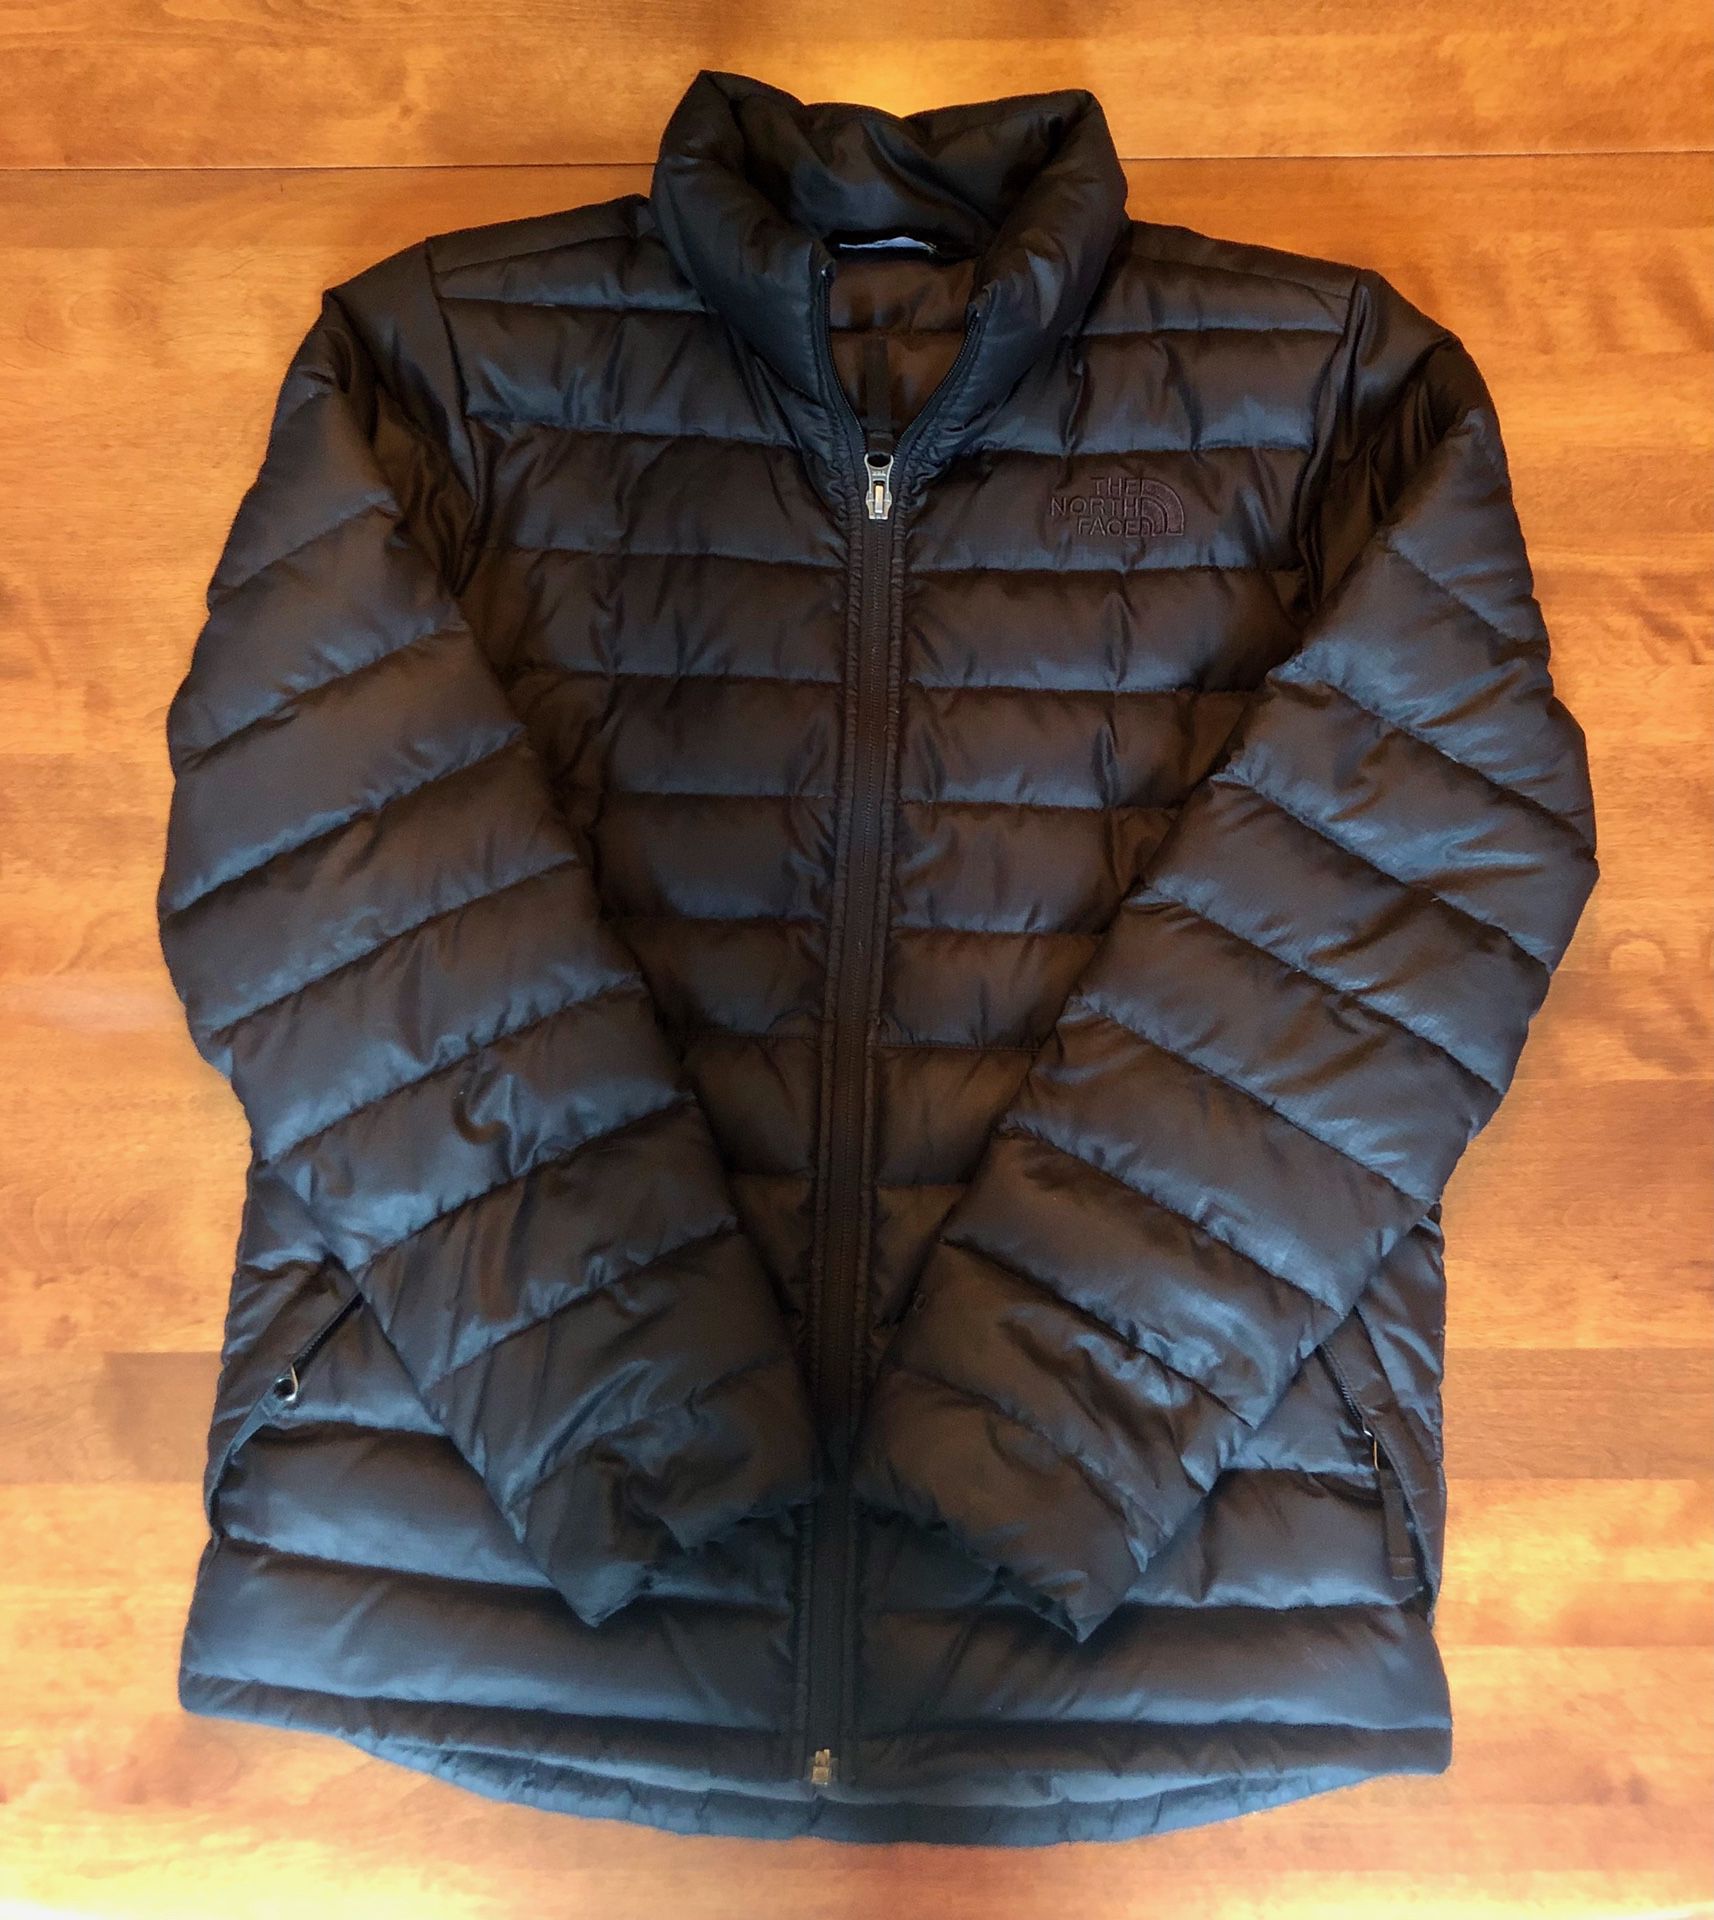 Boys 14-16 Black North Face ThermoBall coat. Worn only one season- like new!